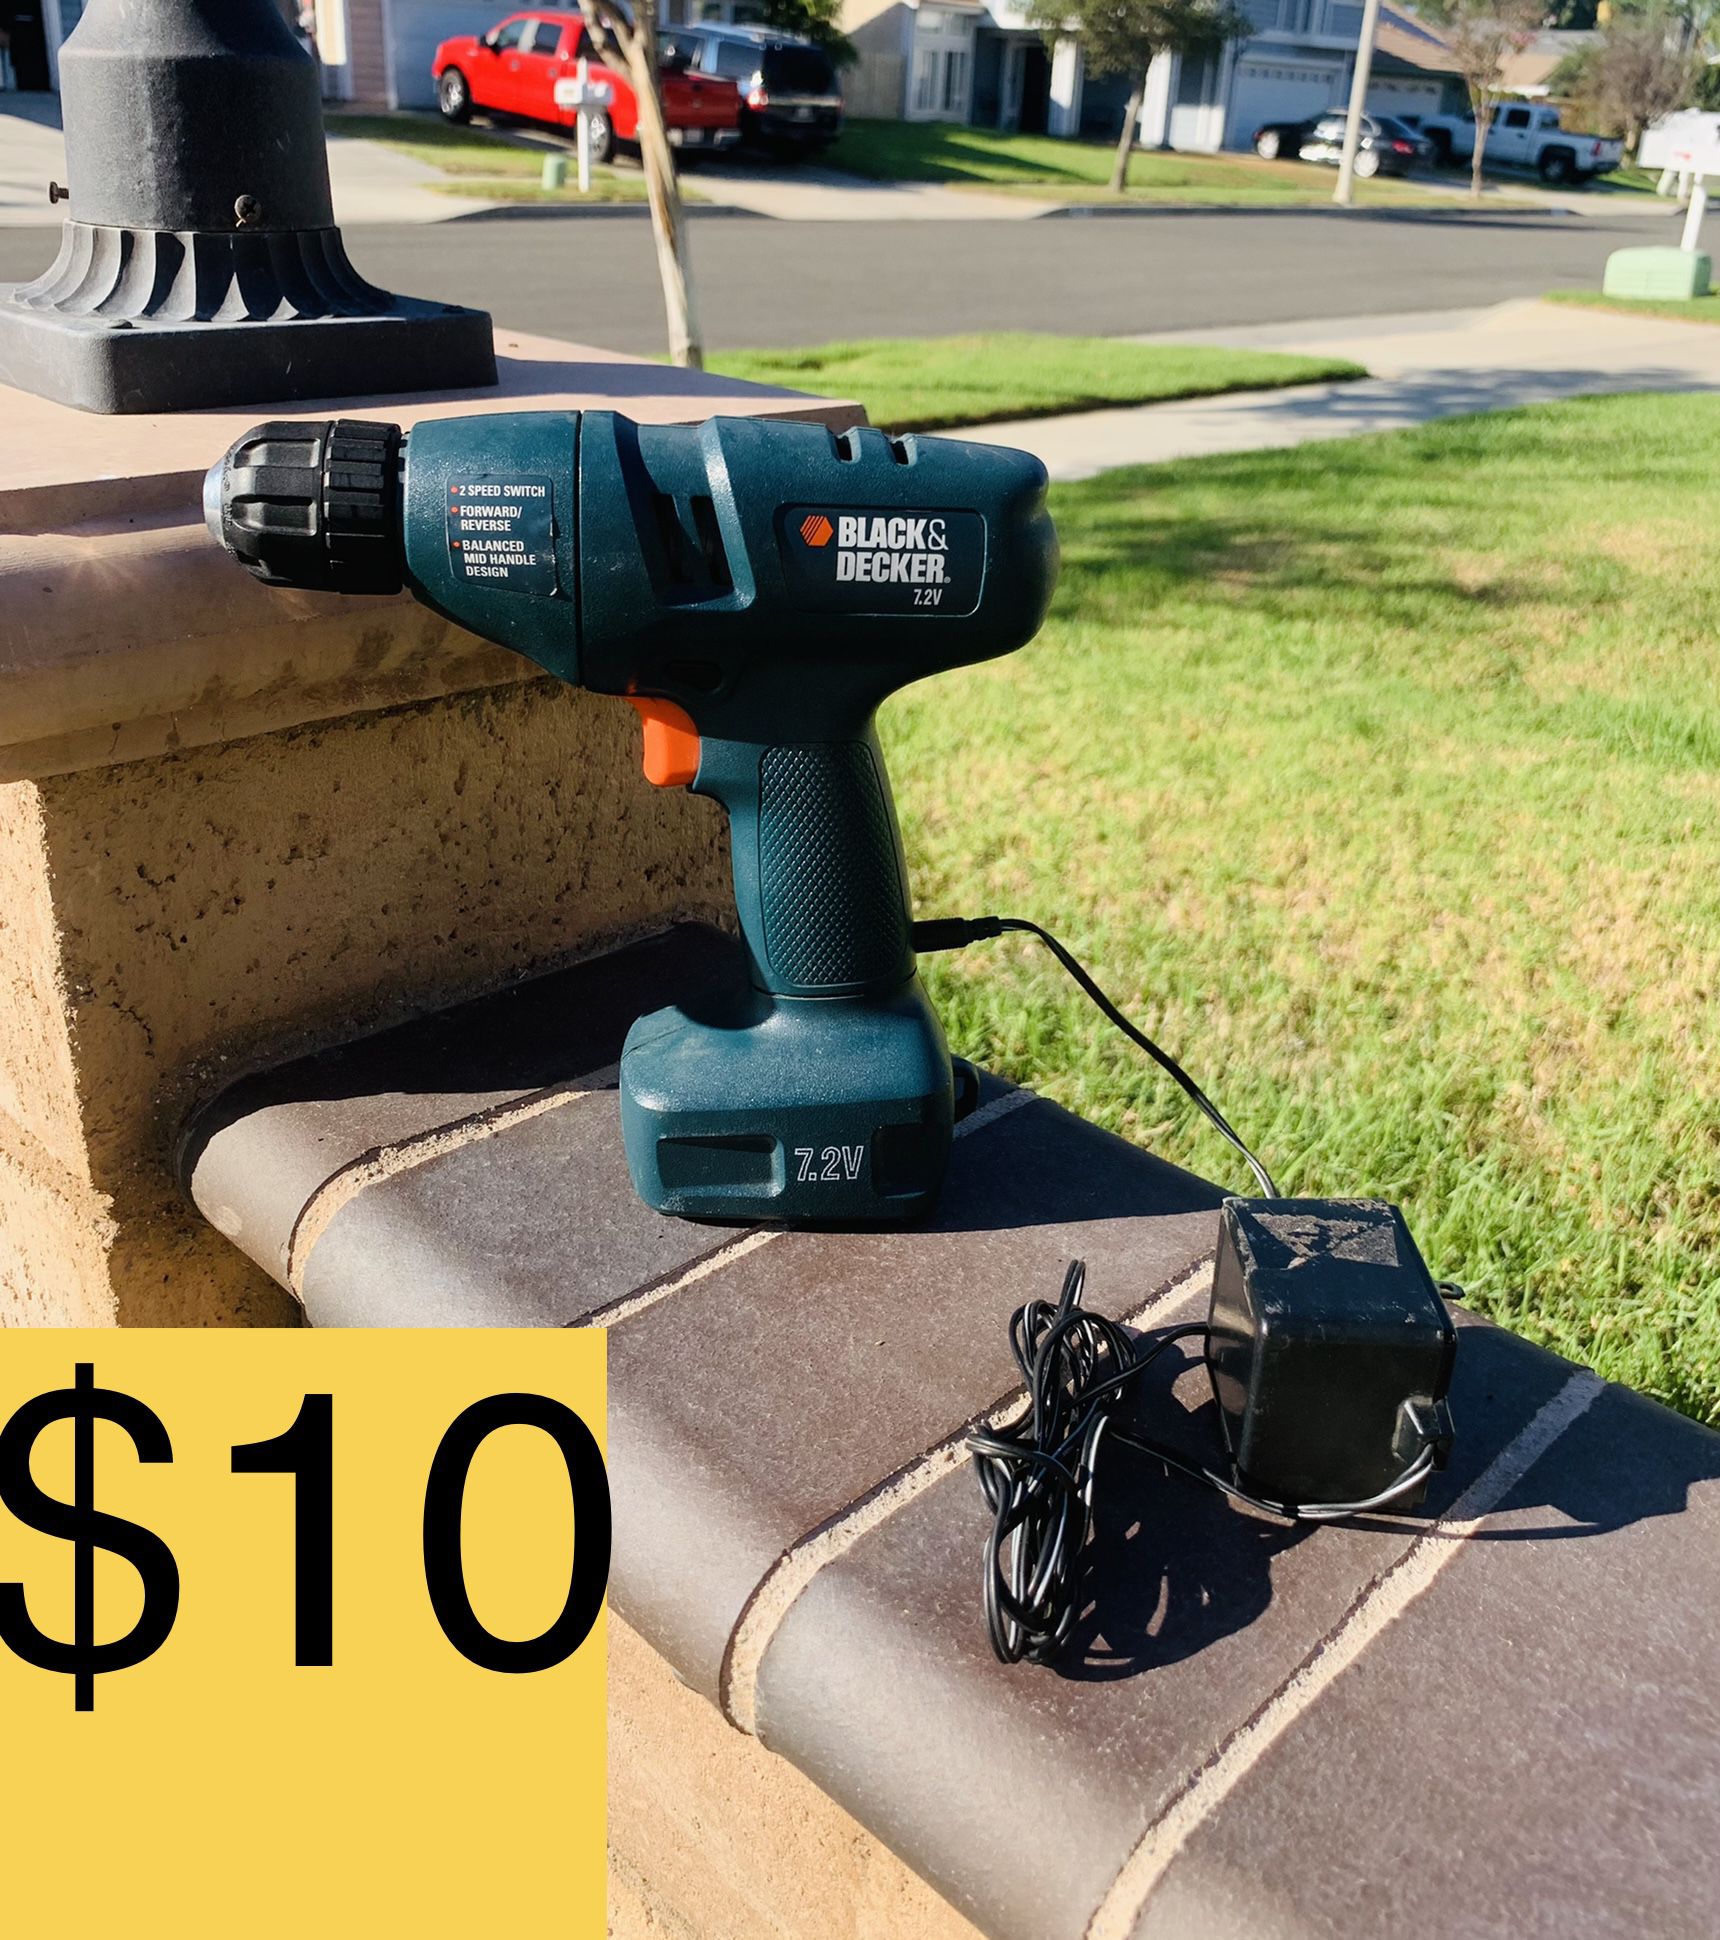 BLACK & DECKER 7.2 Volts With CHARGER DRILL (SELLING FOR $10)